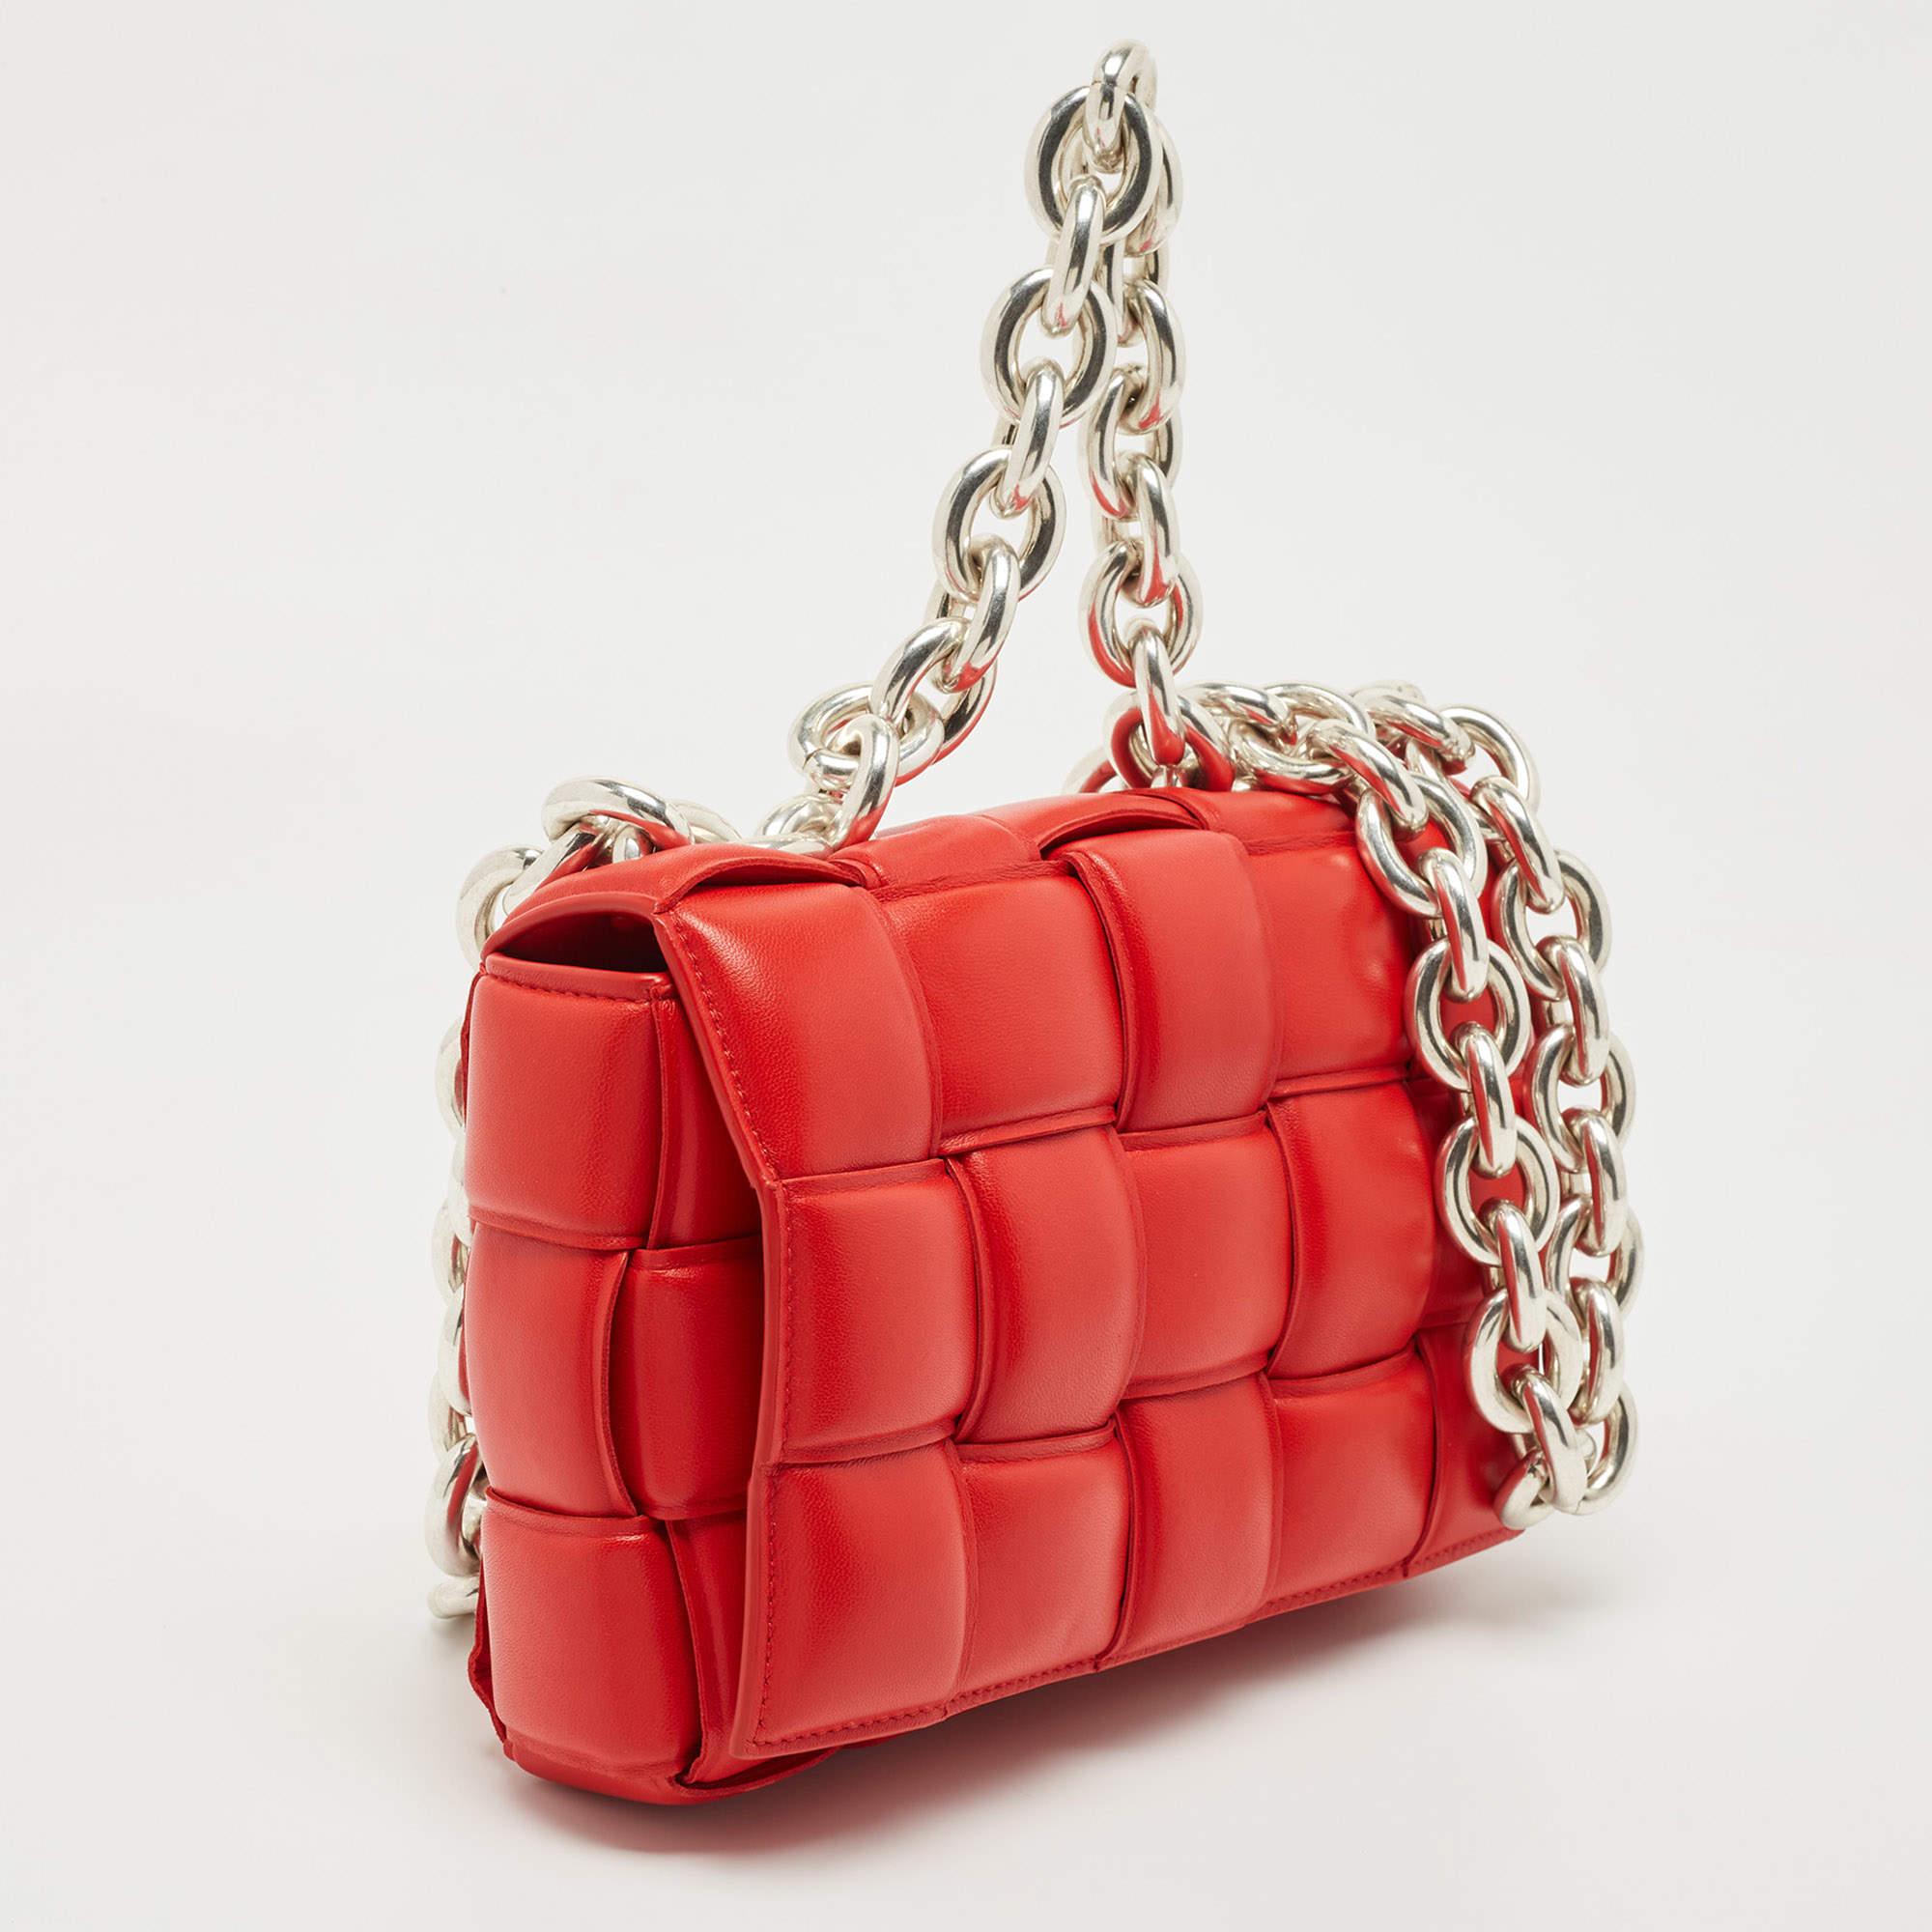 The Cassette bag by Bottega Veneta is all things stylish, trendy and instagrammable. With its playful take on the brand's signature house code - the Intrecciato weave, the bag's exterior flaunts a maxi version of the weave. It is crafted from